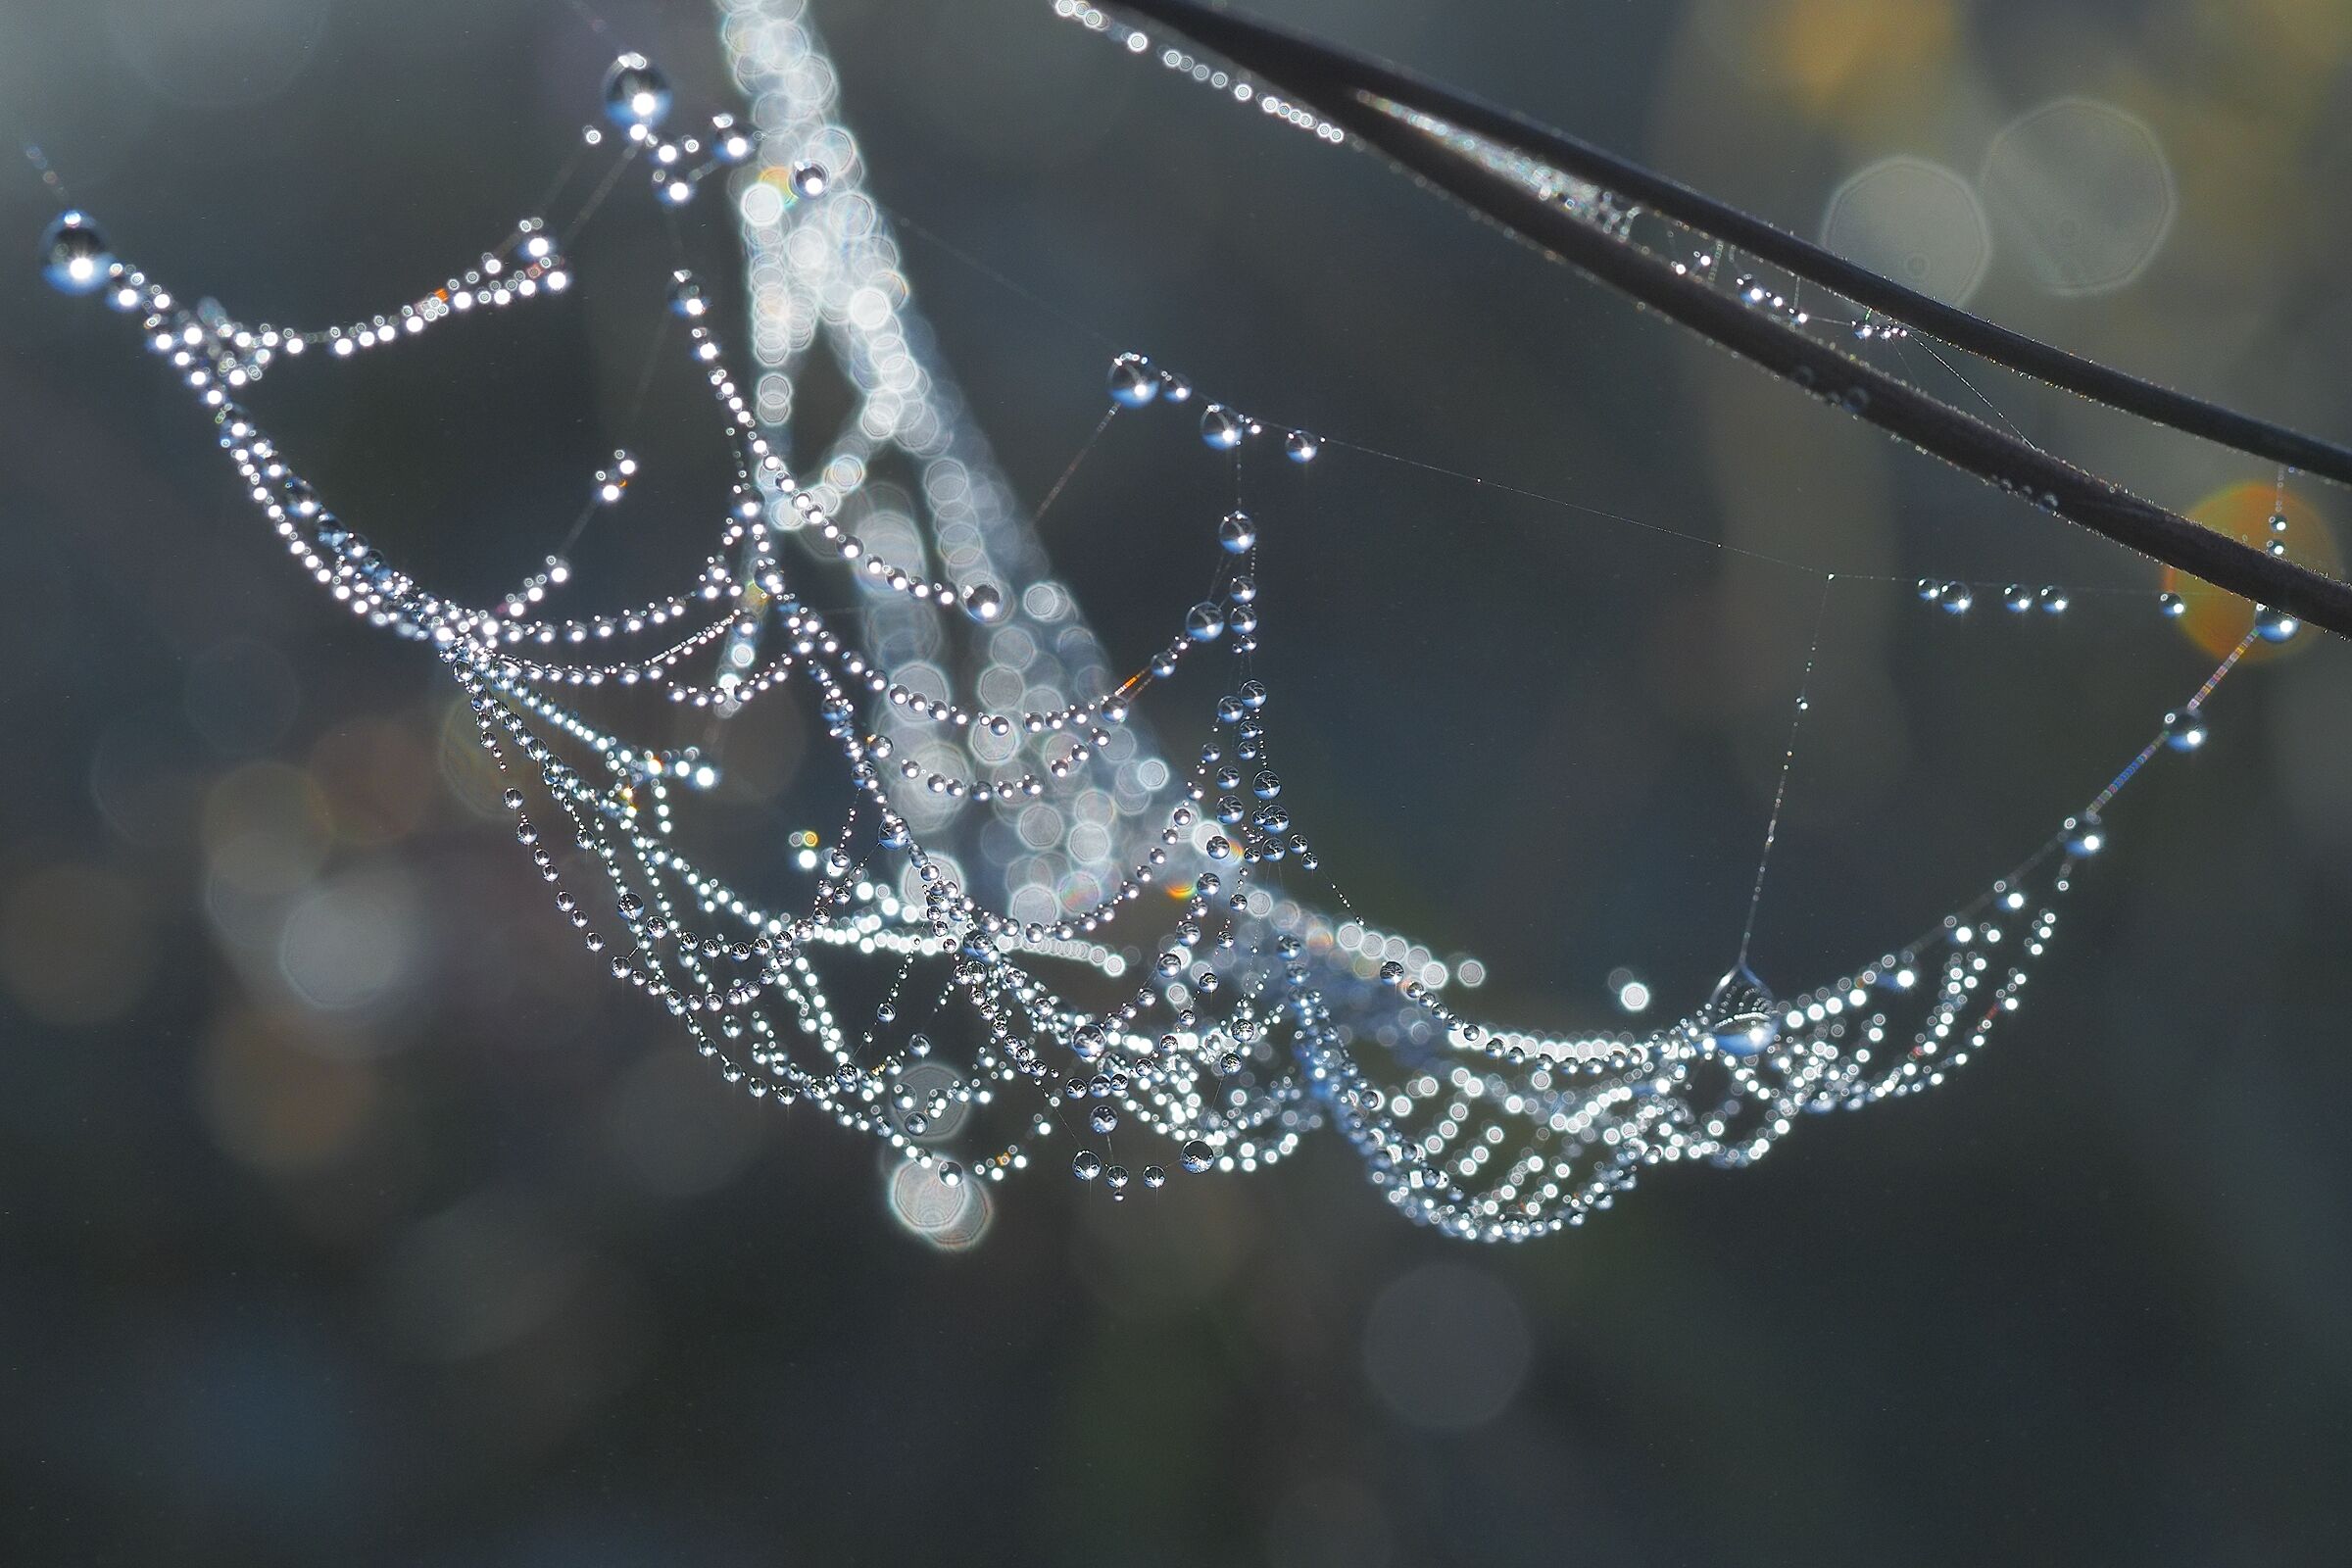 Dewdrops in a spiders web...